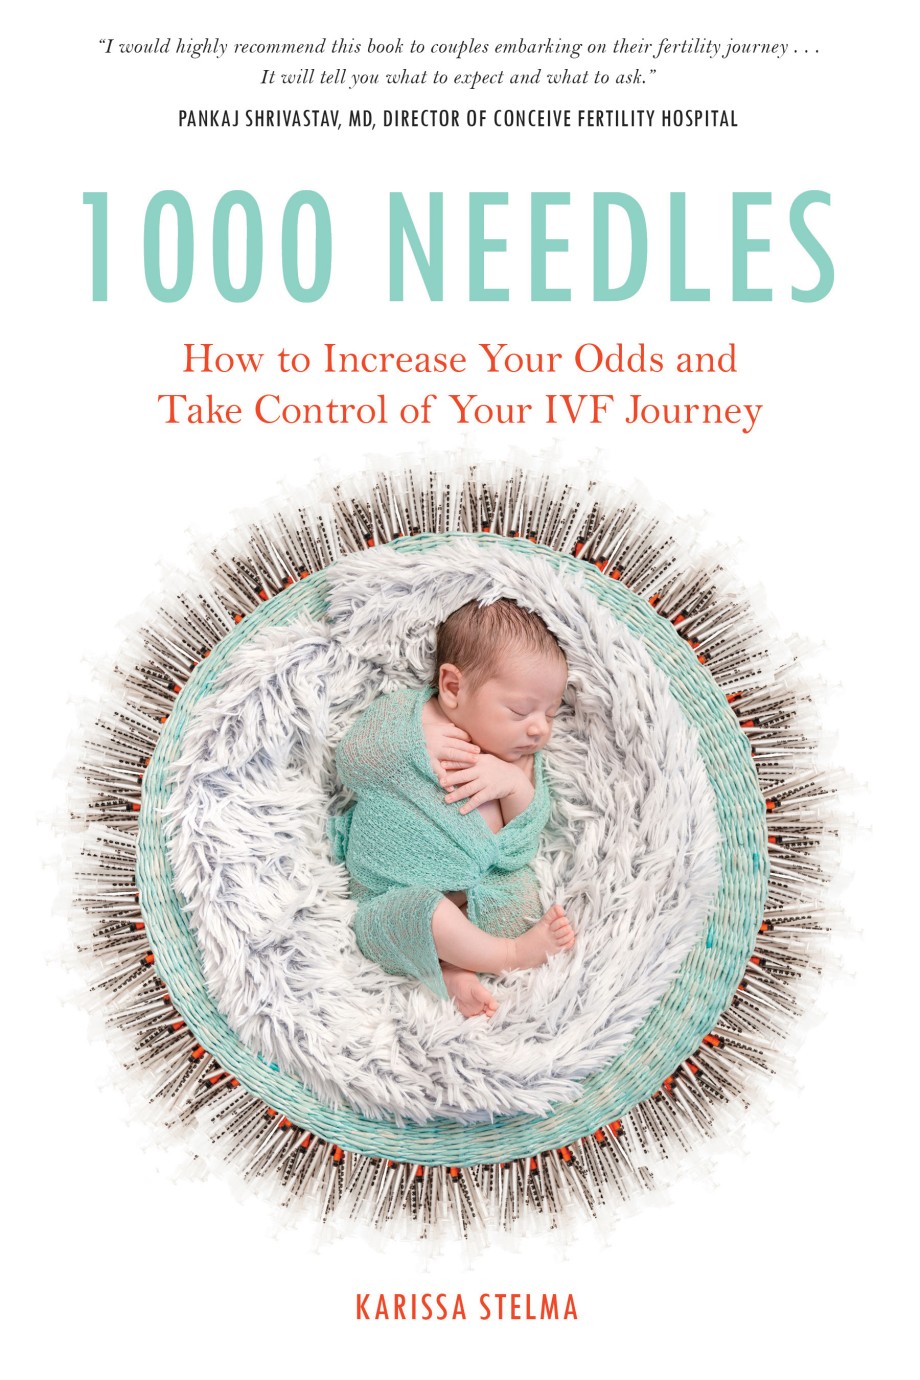 1000 Needles How to Increase Your Odds and Take Control of Your IVF Journey